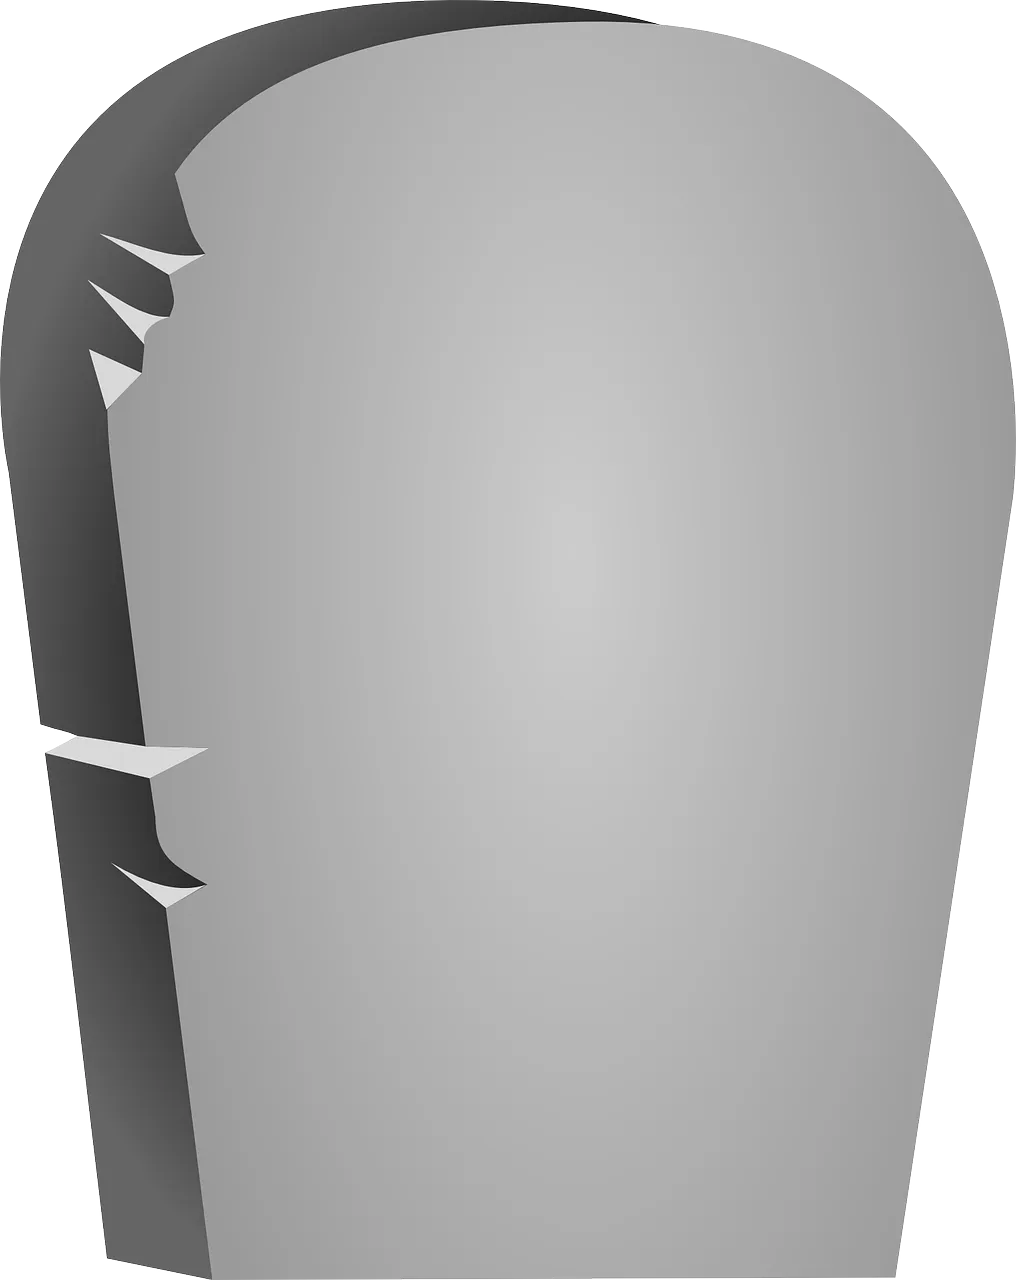 tombstone-151488_1280.png